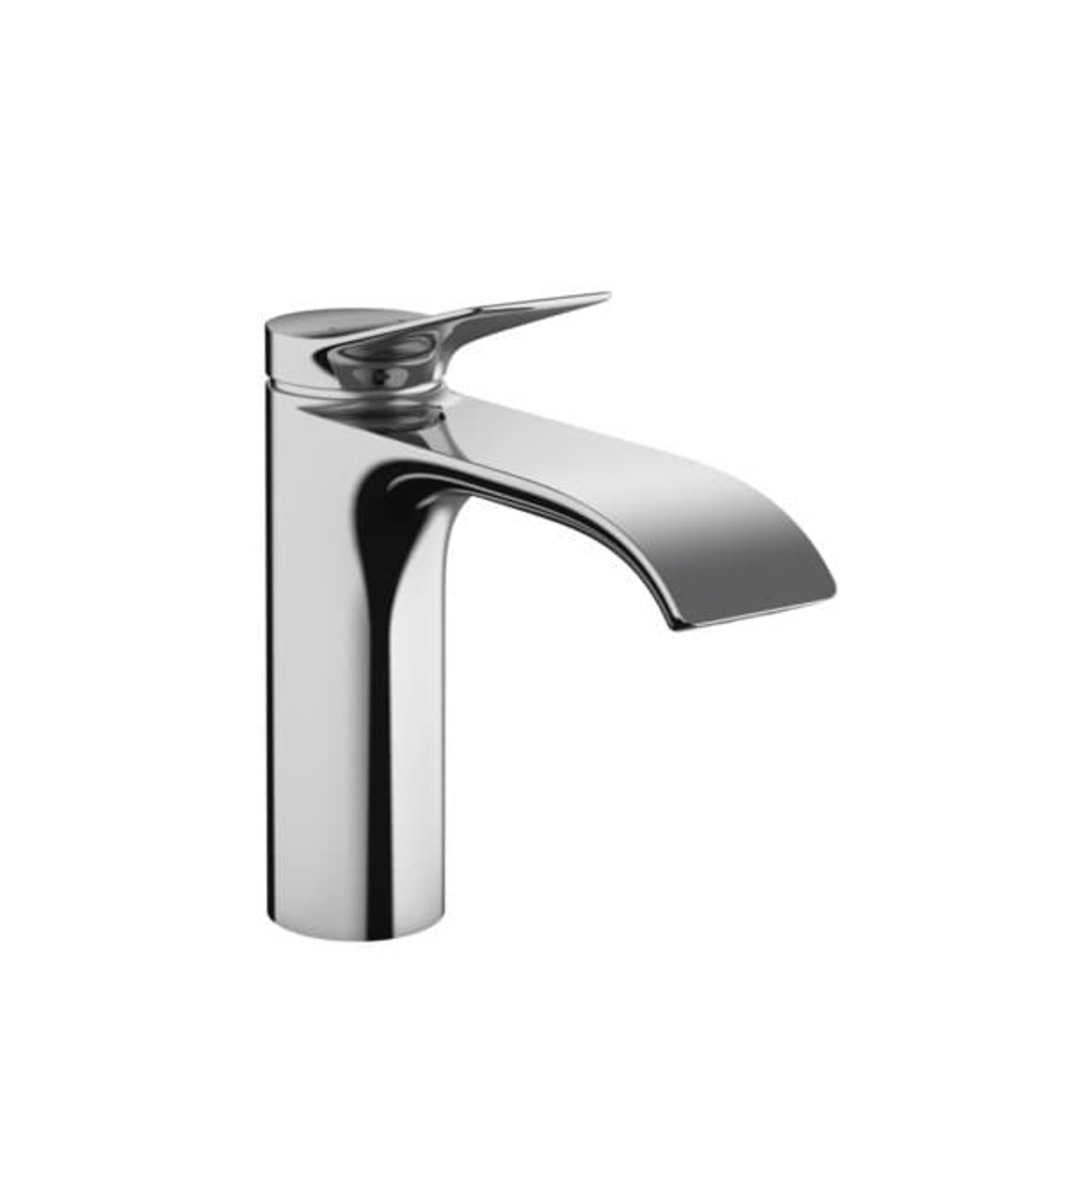 Picture of HANSGROHE Vivenis Single lever basin mixer 110 with pop-up waste set #75020000 - Chrome